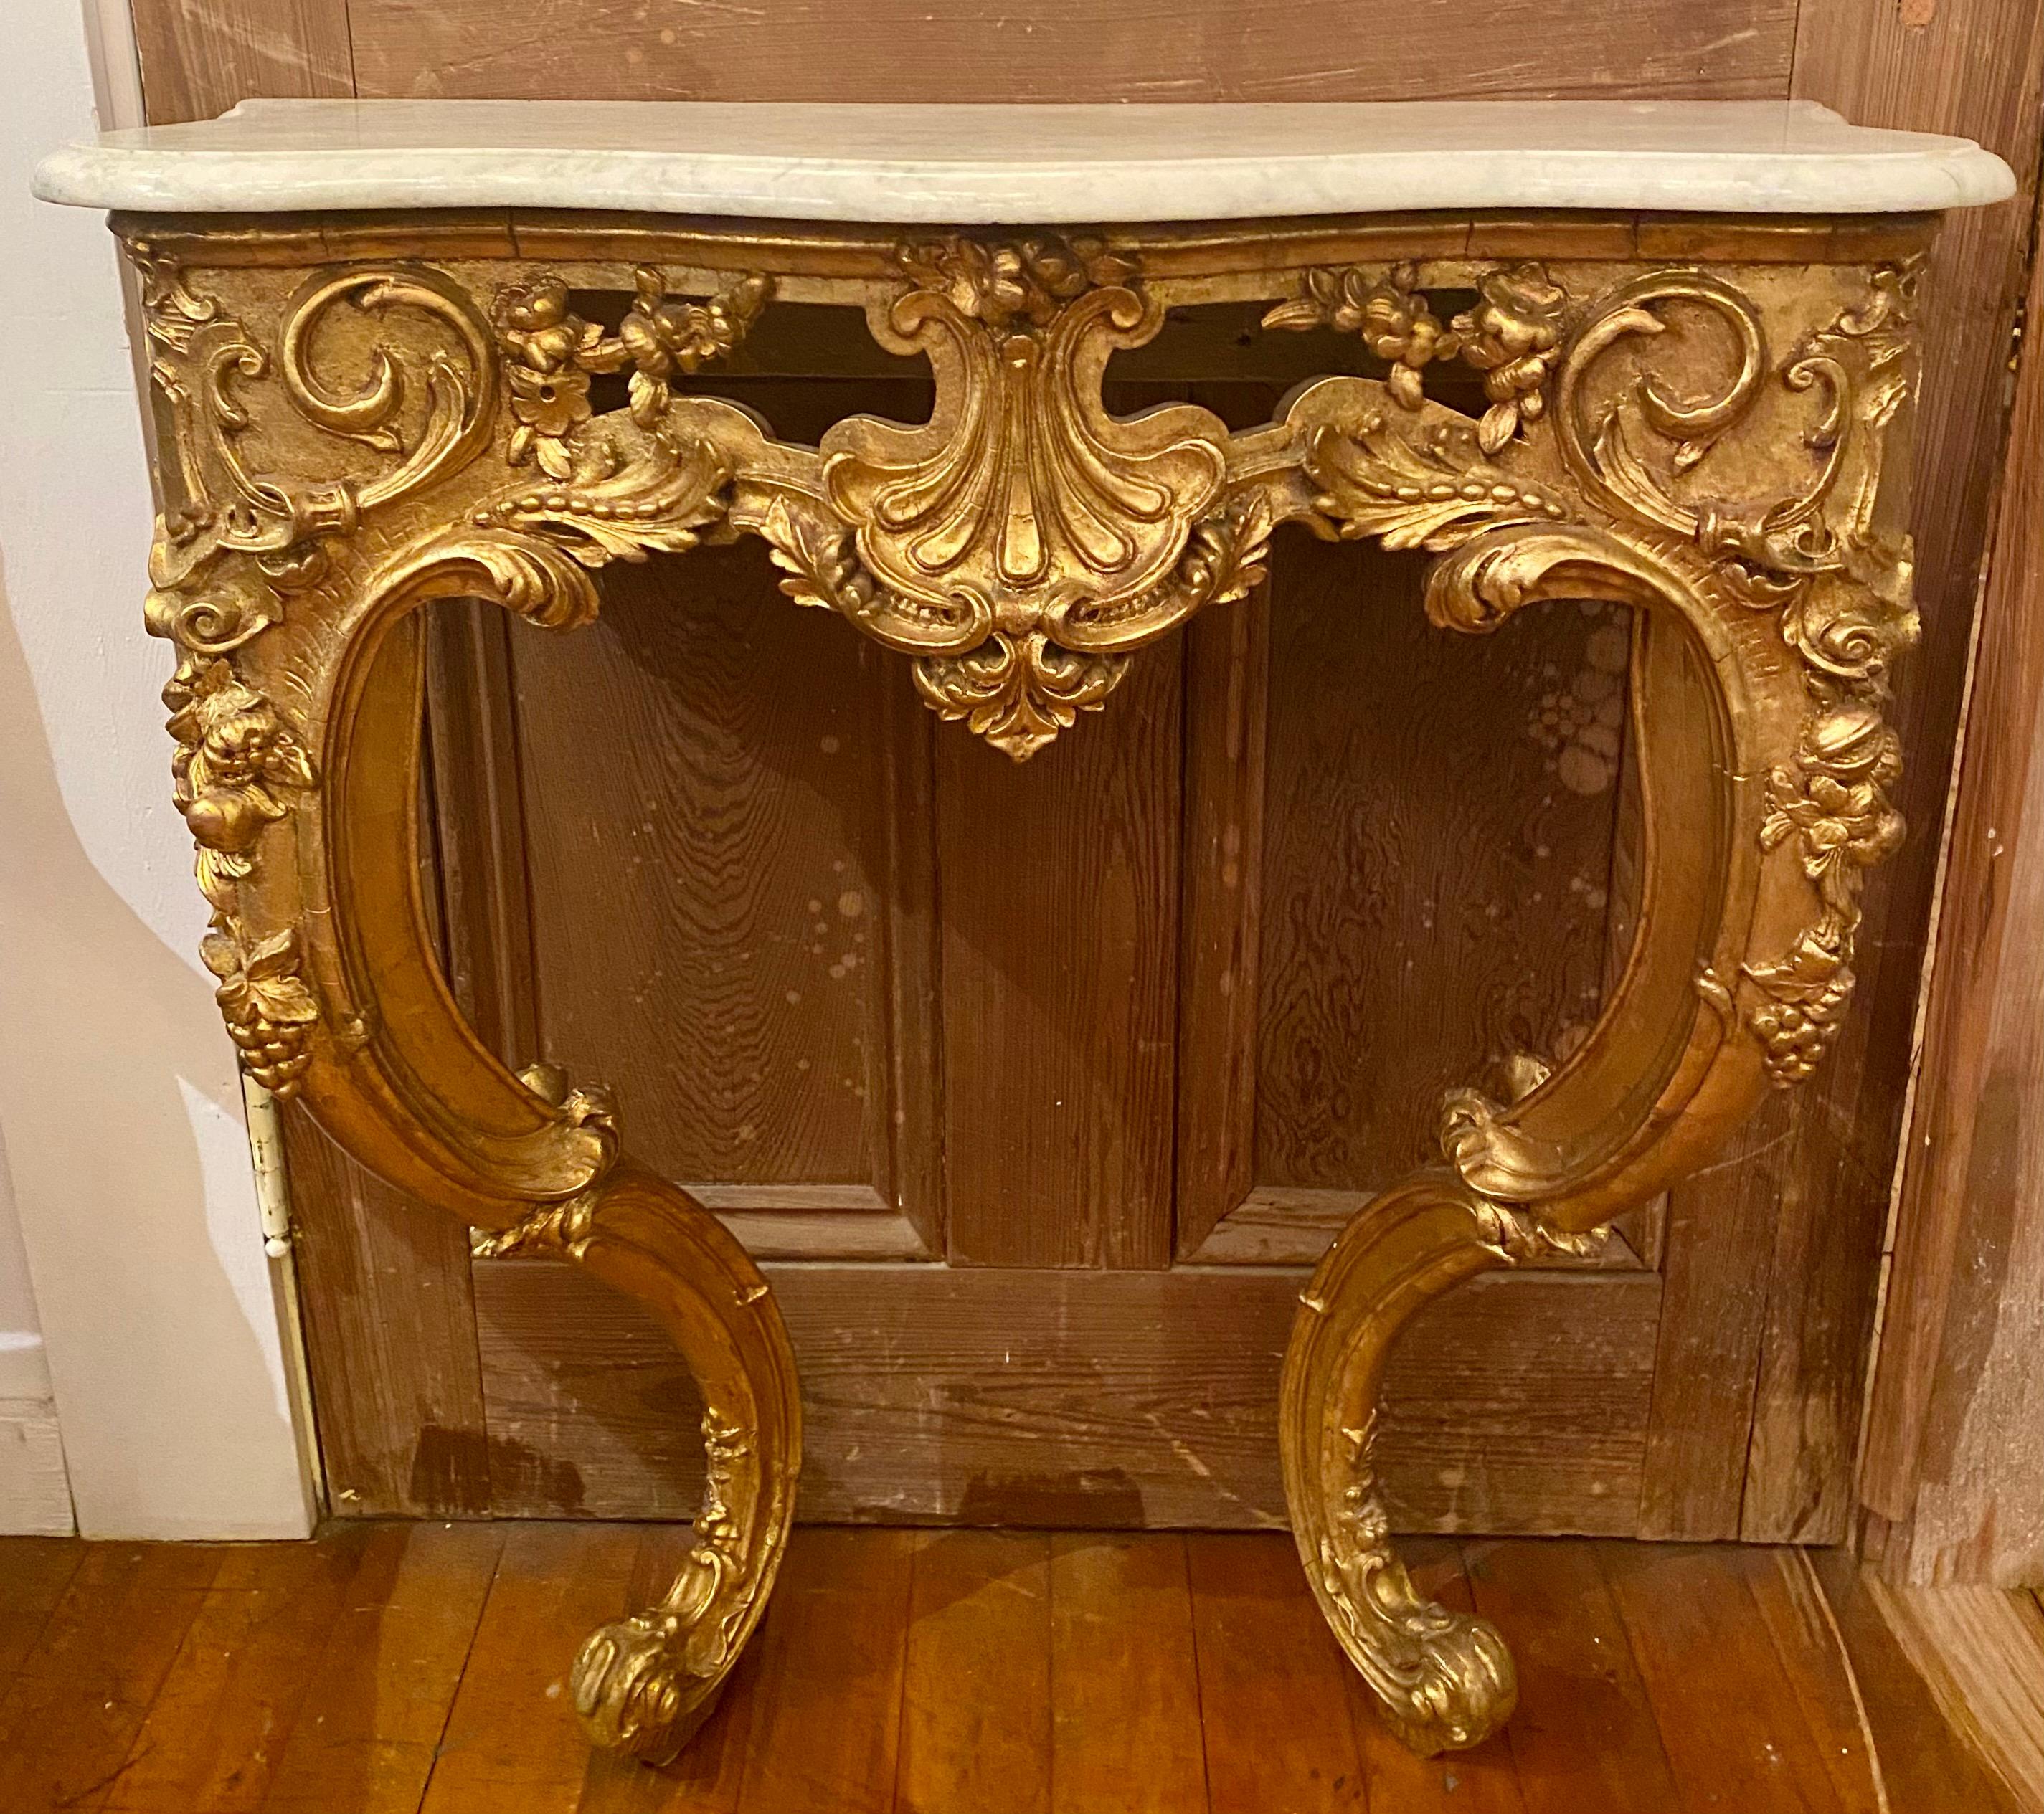 Antique French Louis XV style gold console with white & grey marble top, Circa 1910-1920.